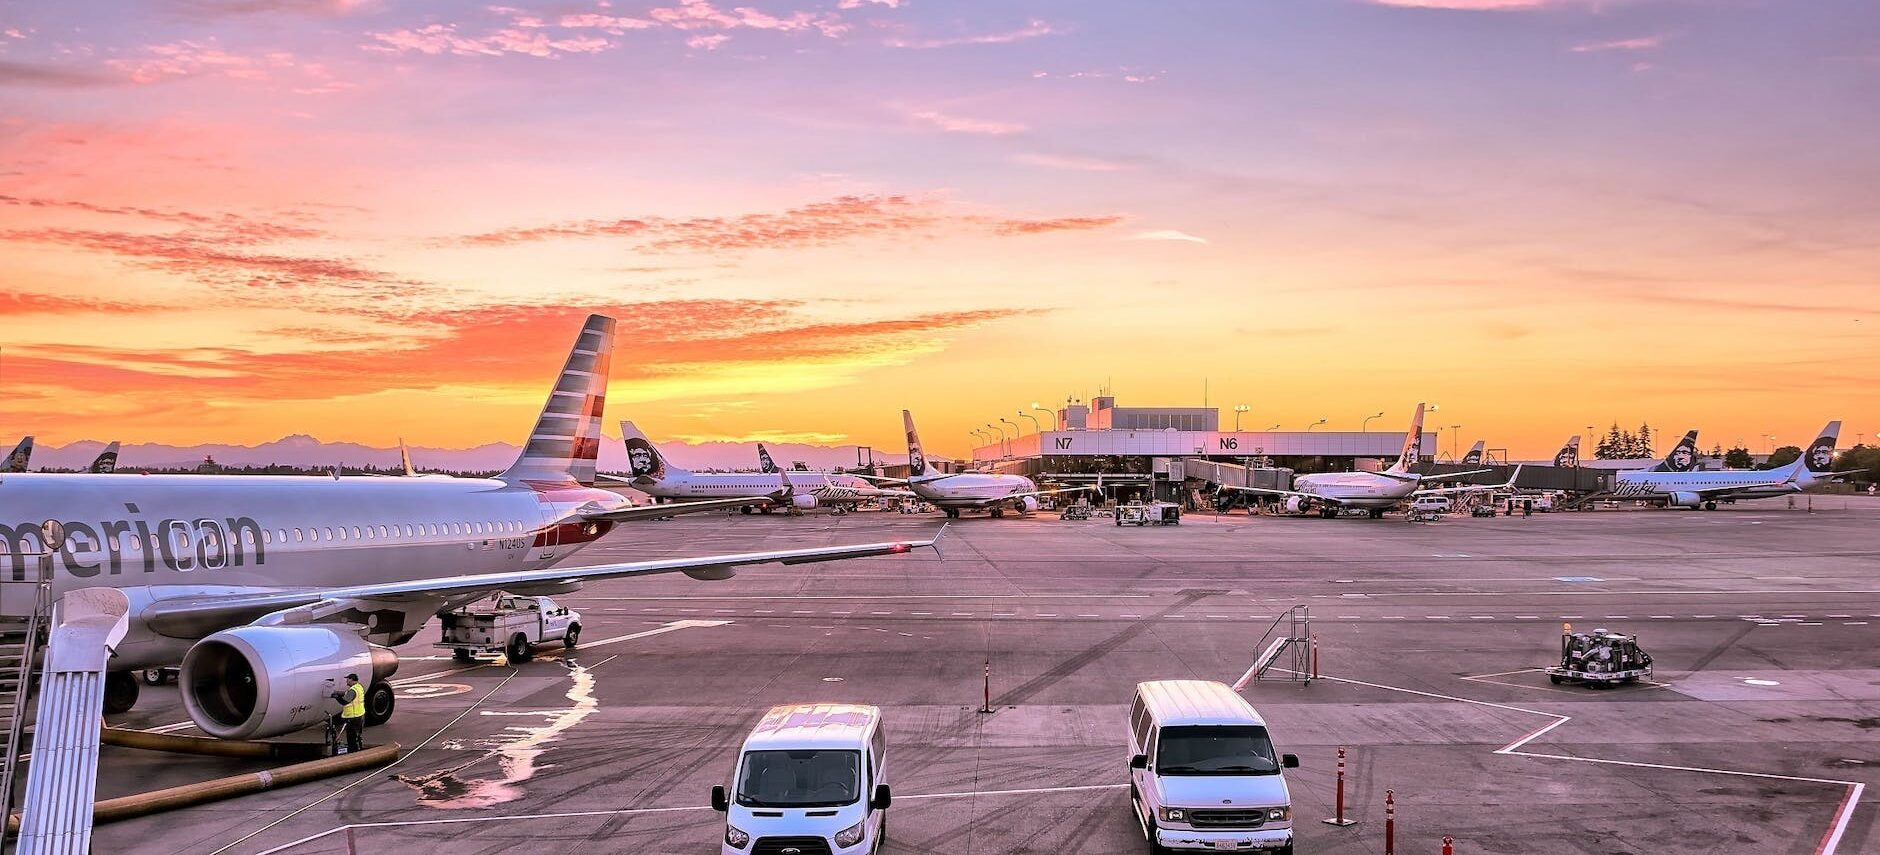 Read more about the article Airport Enterprises: An Economic Analysis